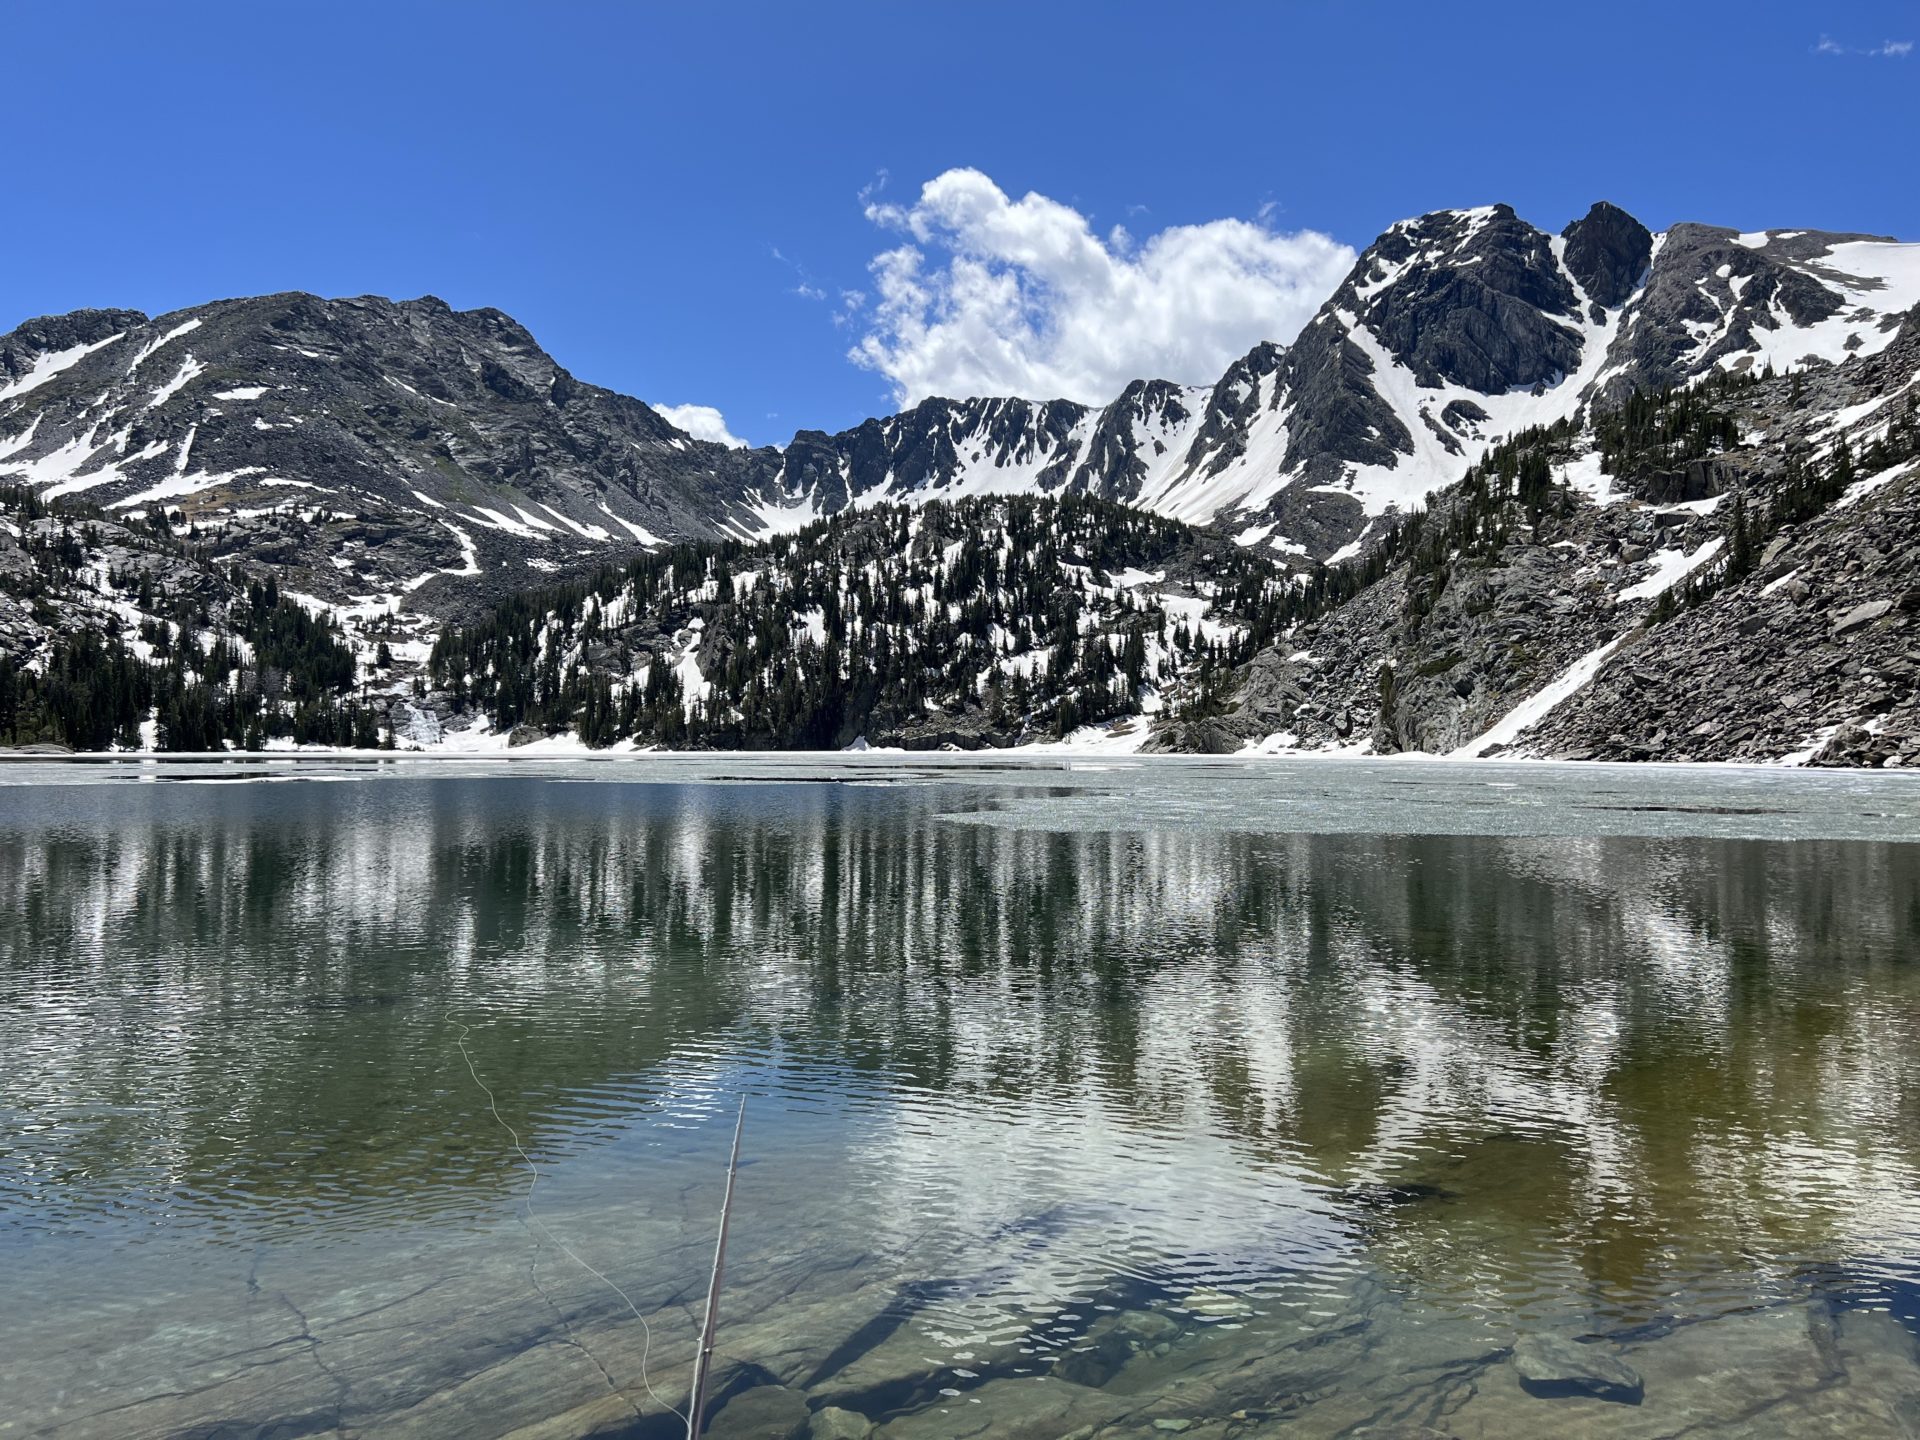 Knoff Group Presents: Our Favorite Lake Hikes in Bozeman